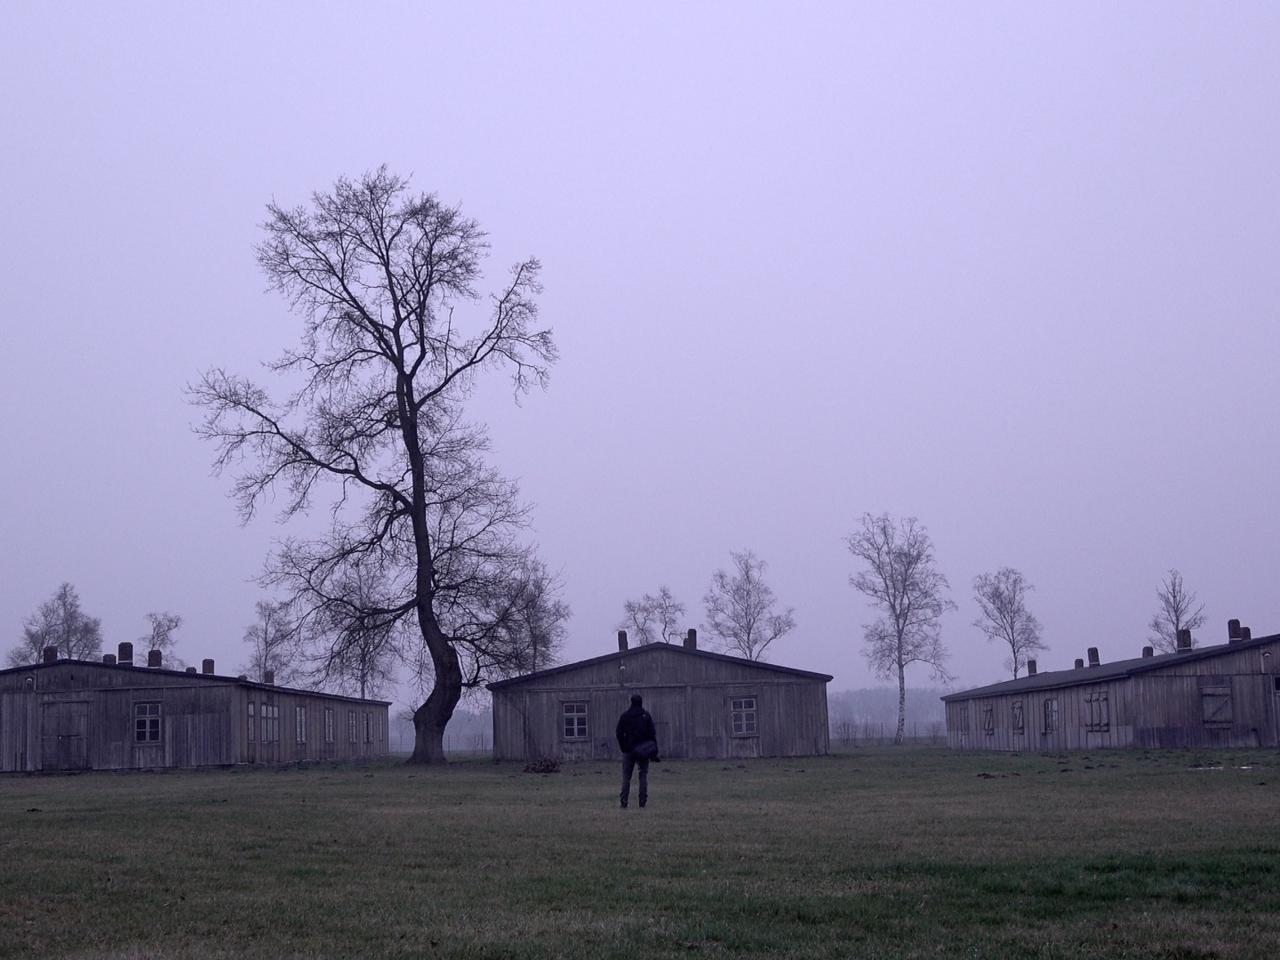 A bleak wintery outdoors scene featuring three buildings with a figure looking at the buildings, and a leafless tree.